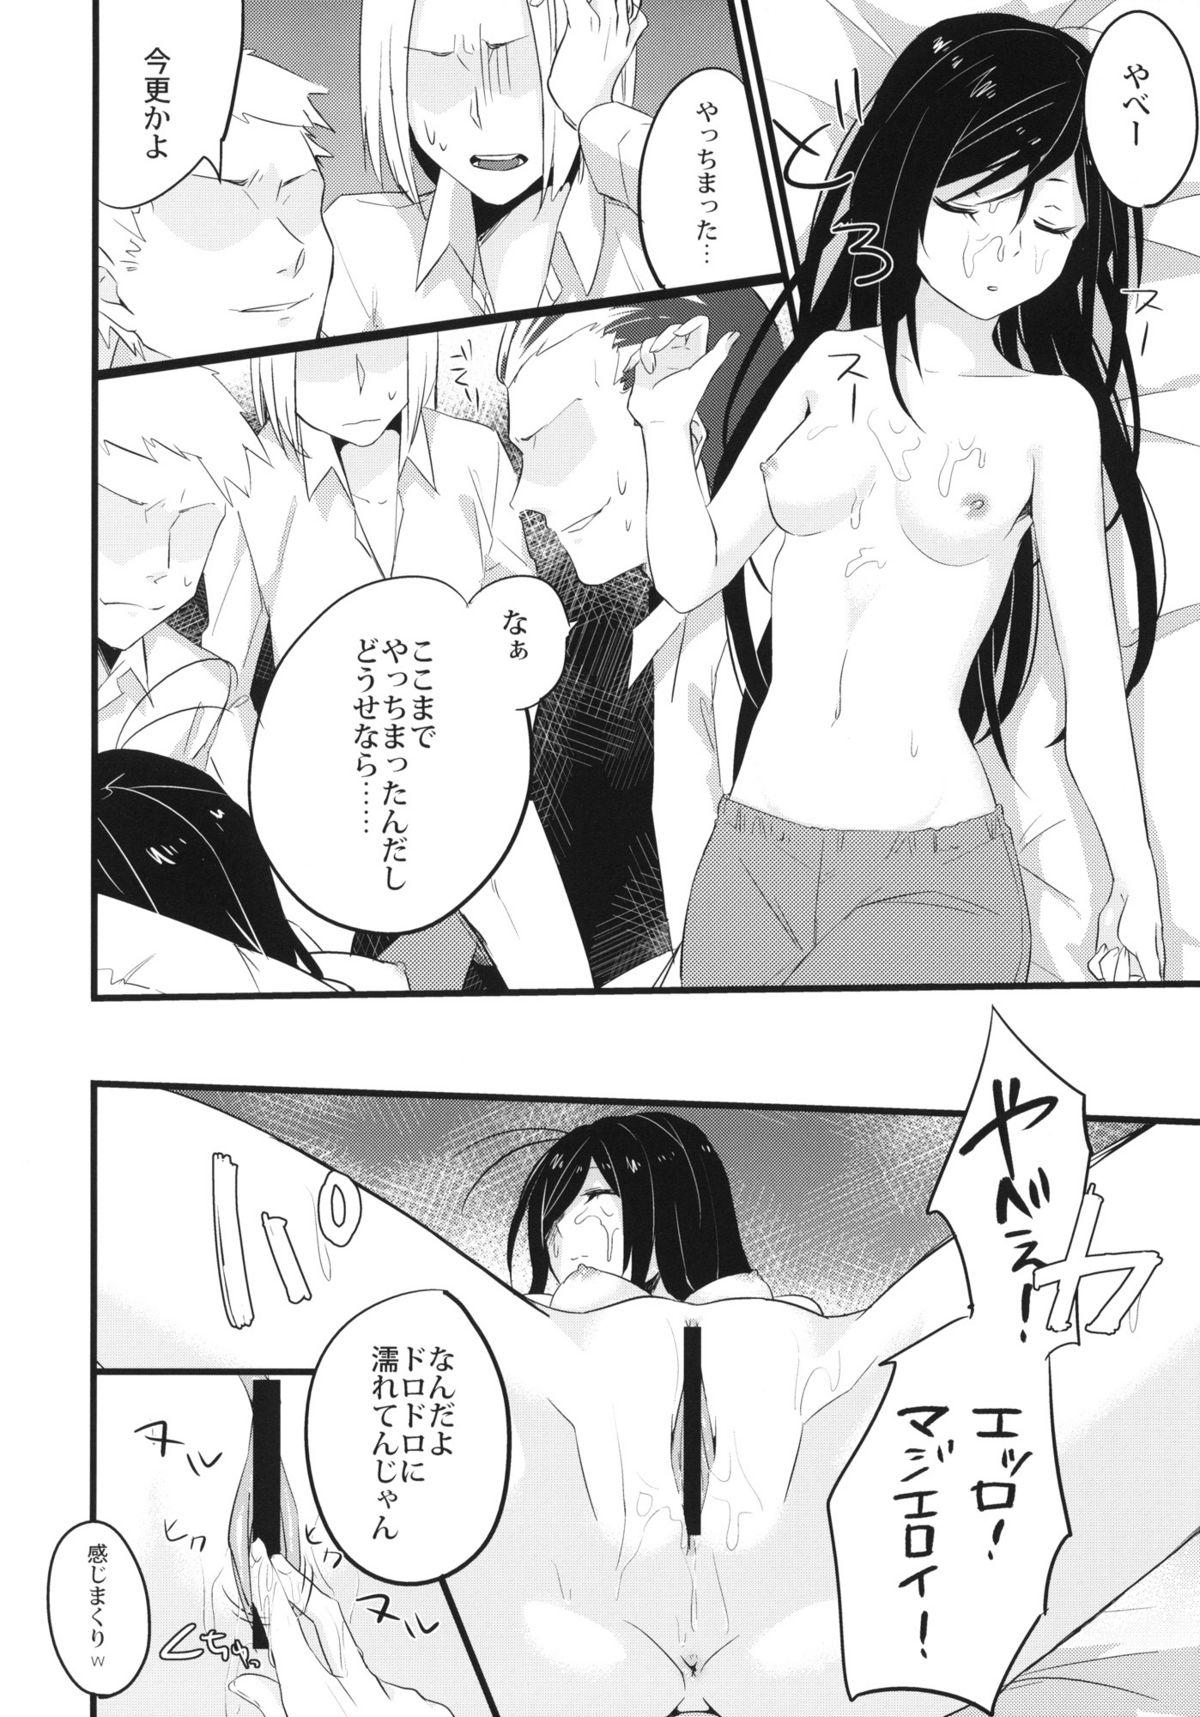 Rough Sex stall - Accel world Chile - Page 9